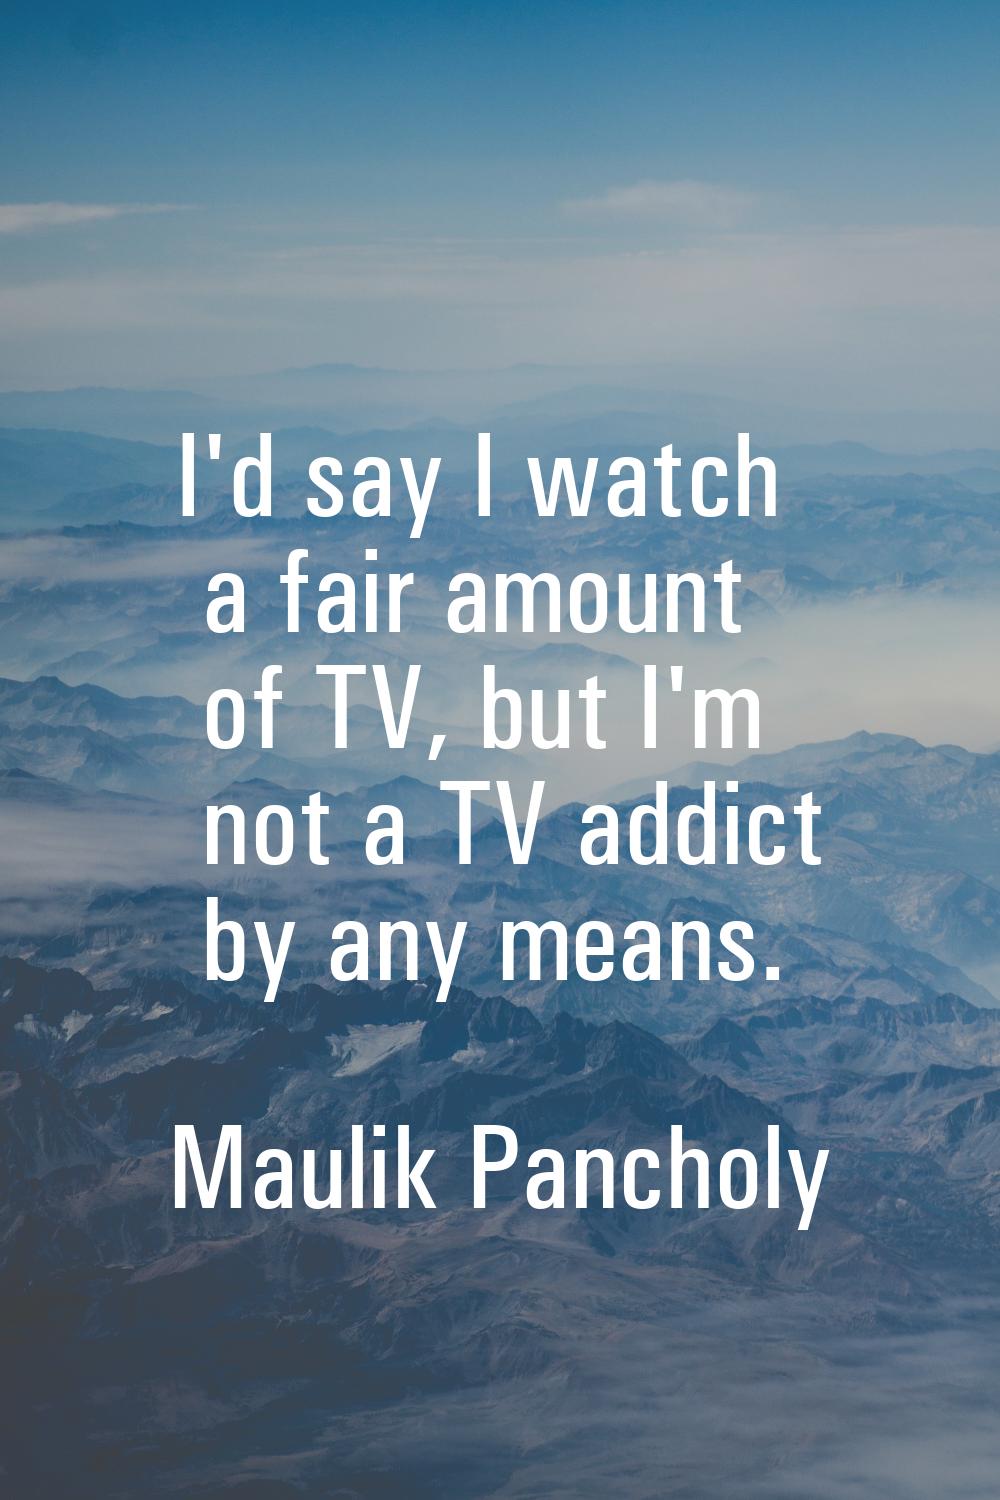 I'd say I watch a fair amount of TV, but I'm not a TV addict by any means.